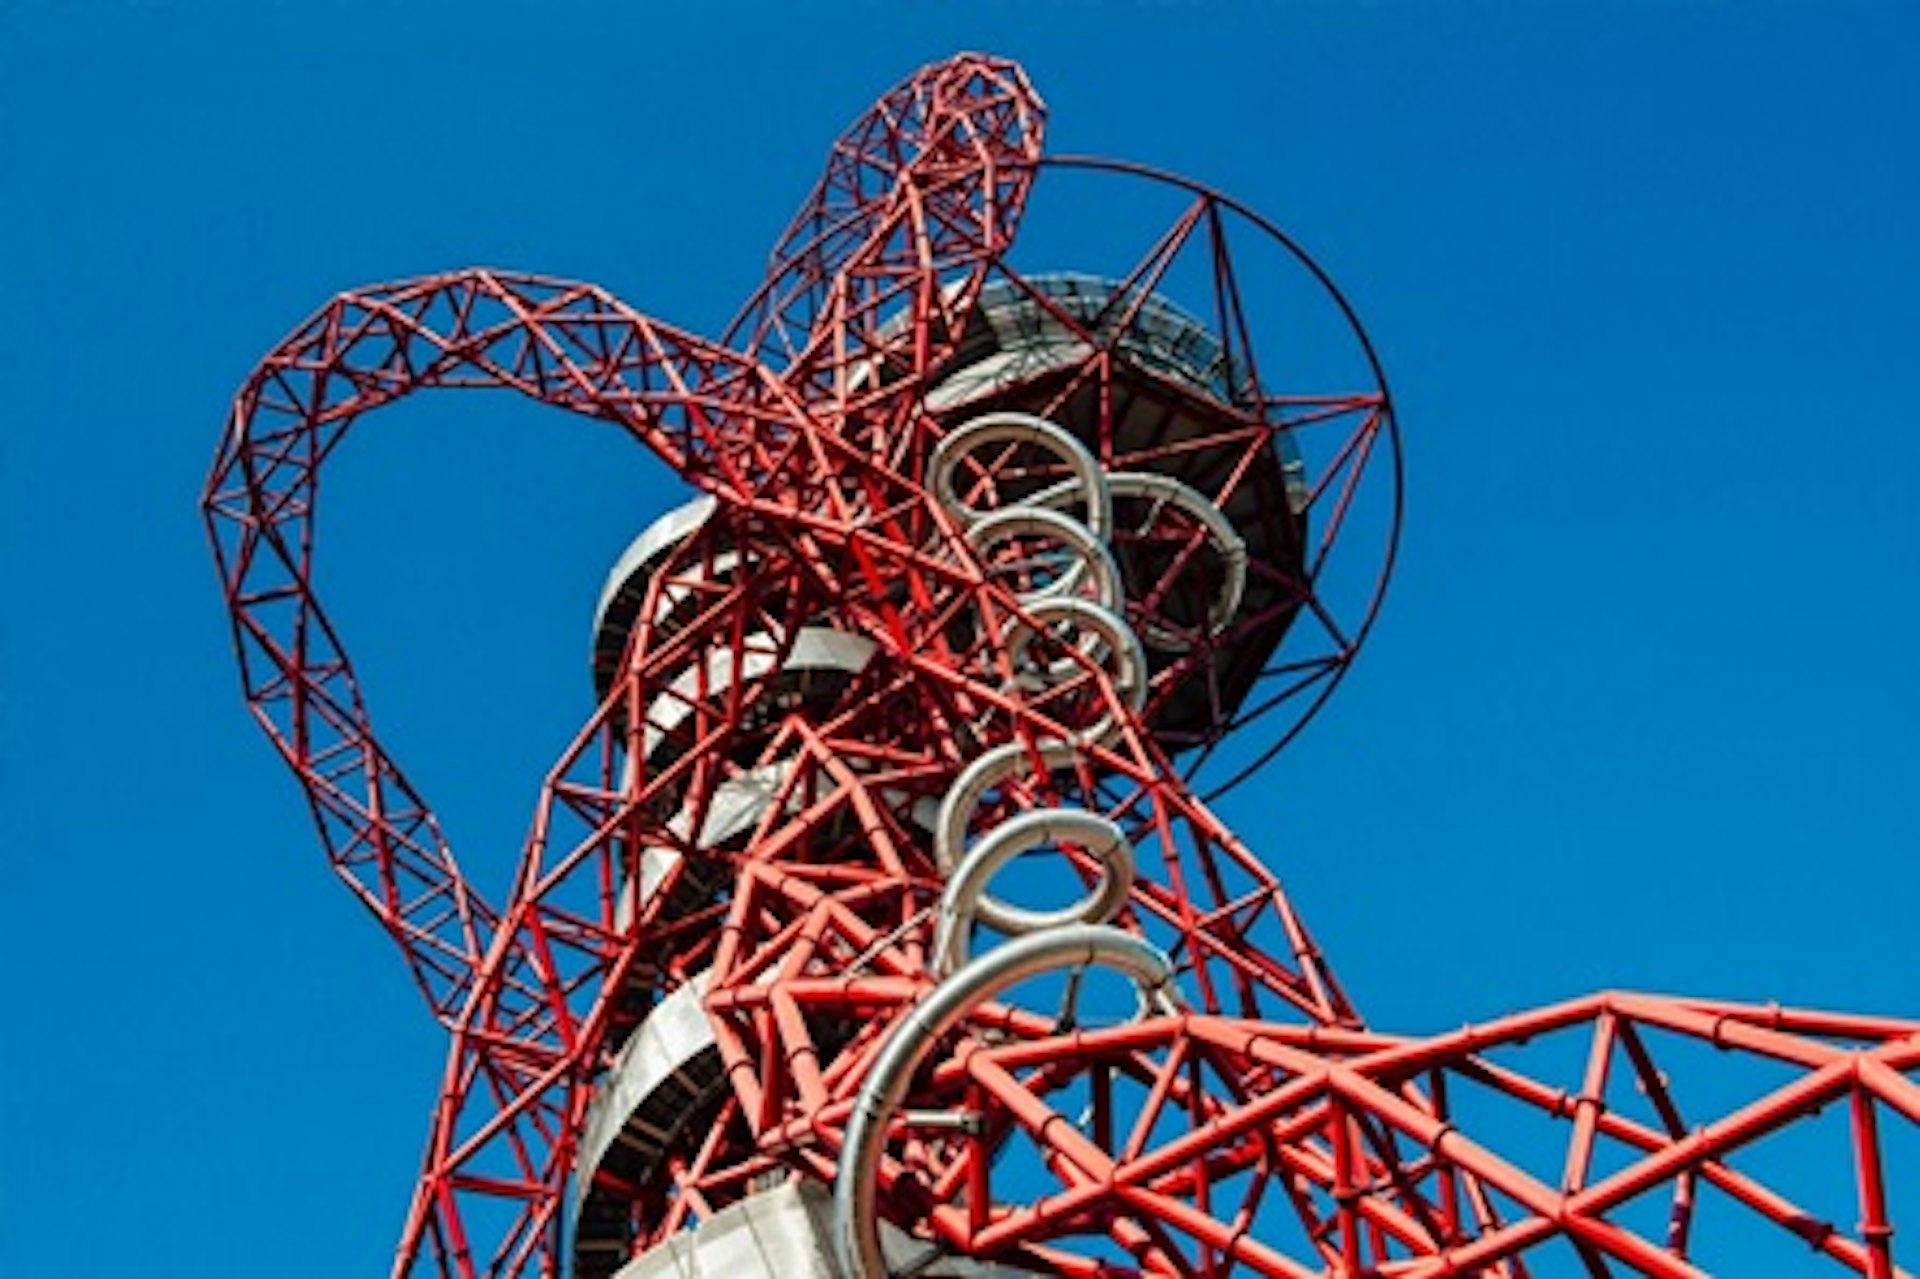 Thames Jet Boat Rush and The Slide at The ArcelorMittal Orbit for Two 4